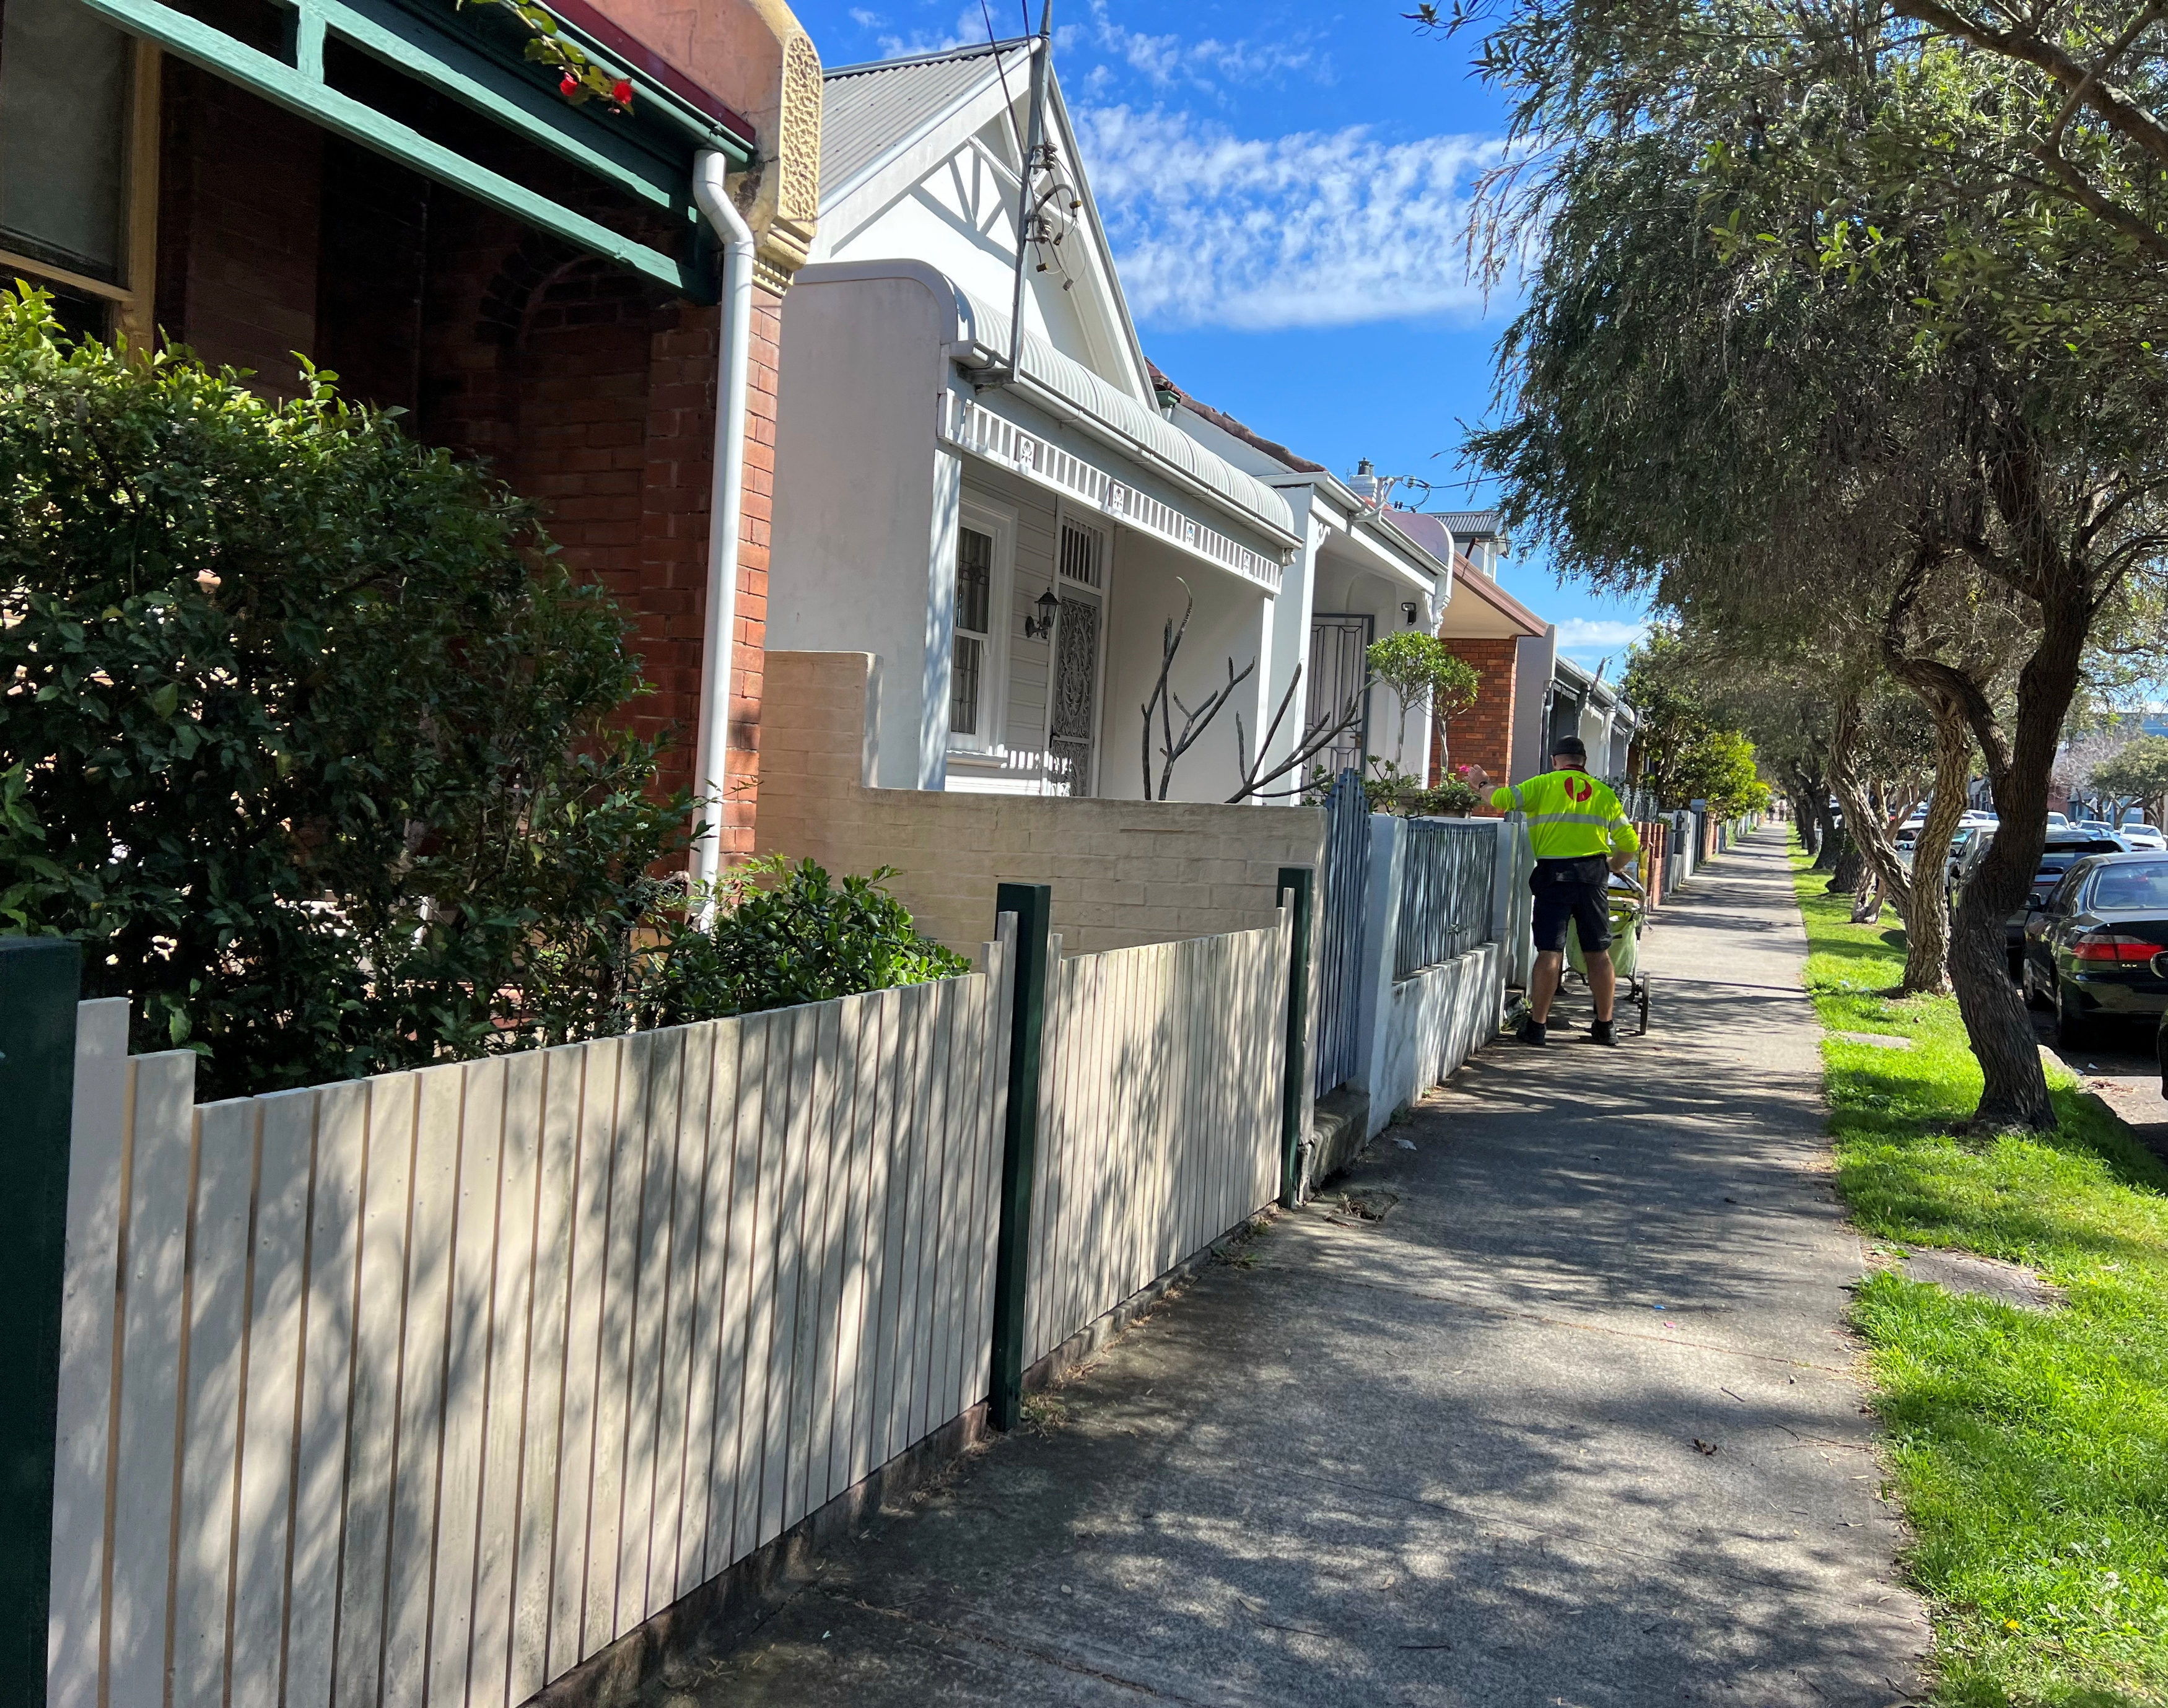 A post office worker delivers mail to townhouses in Leichhardt